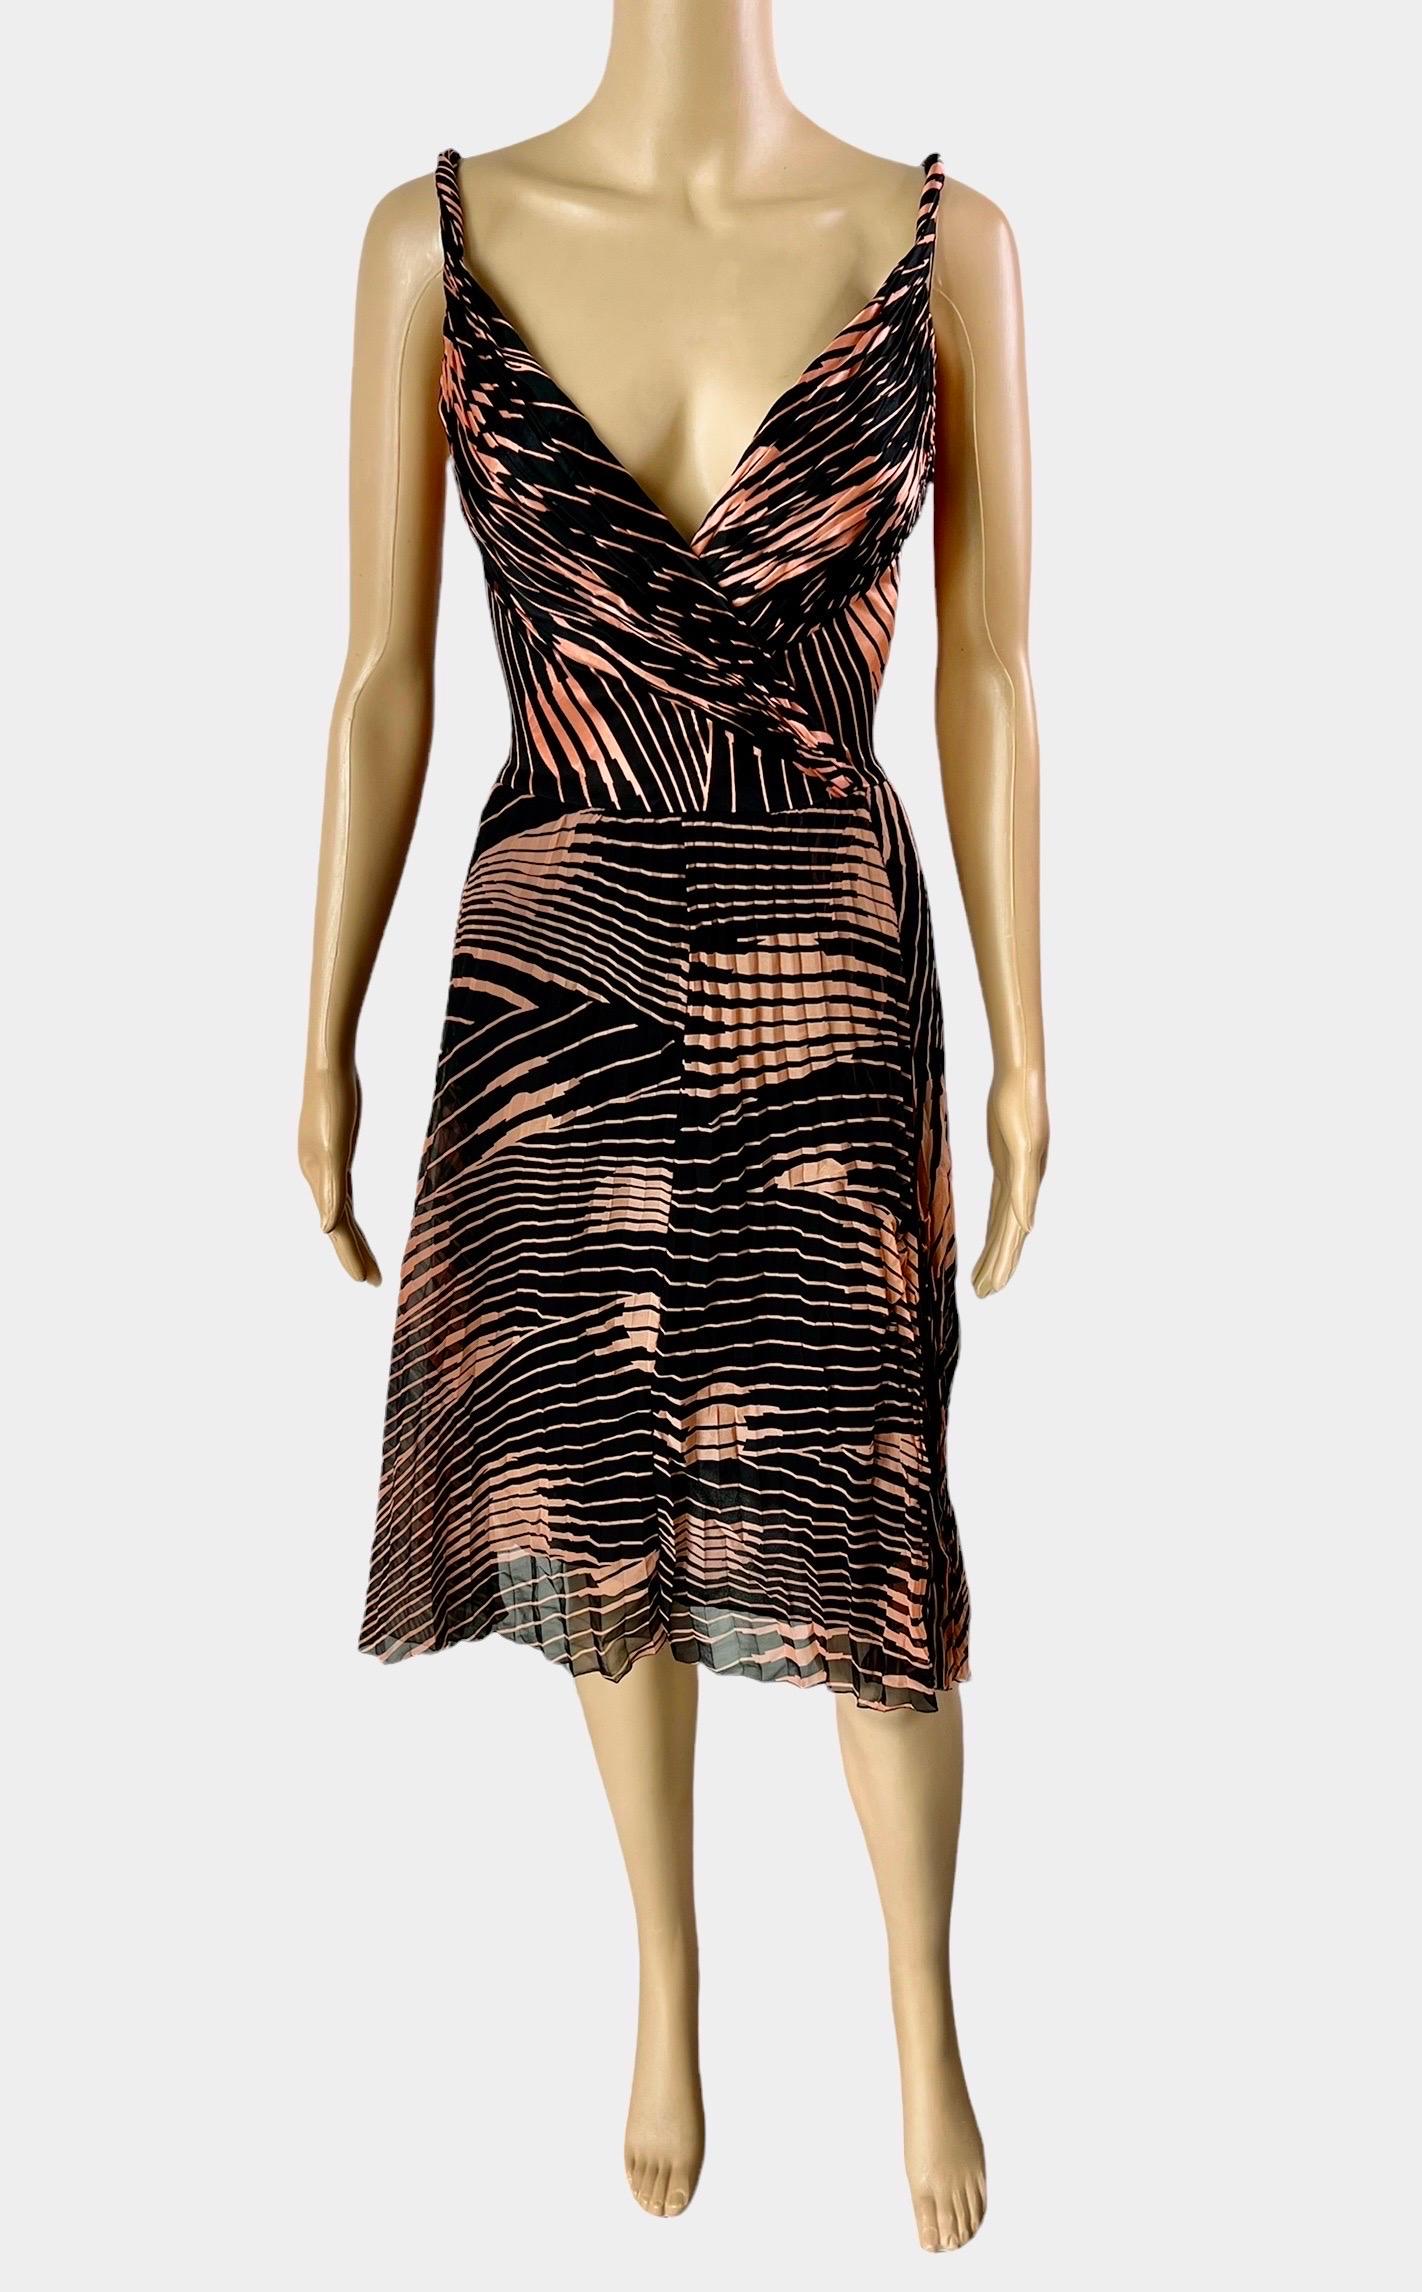 Gianni Versace c.2001 Plunged Bustier Open Back Geometric Abstract Print Dress For Sale 1